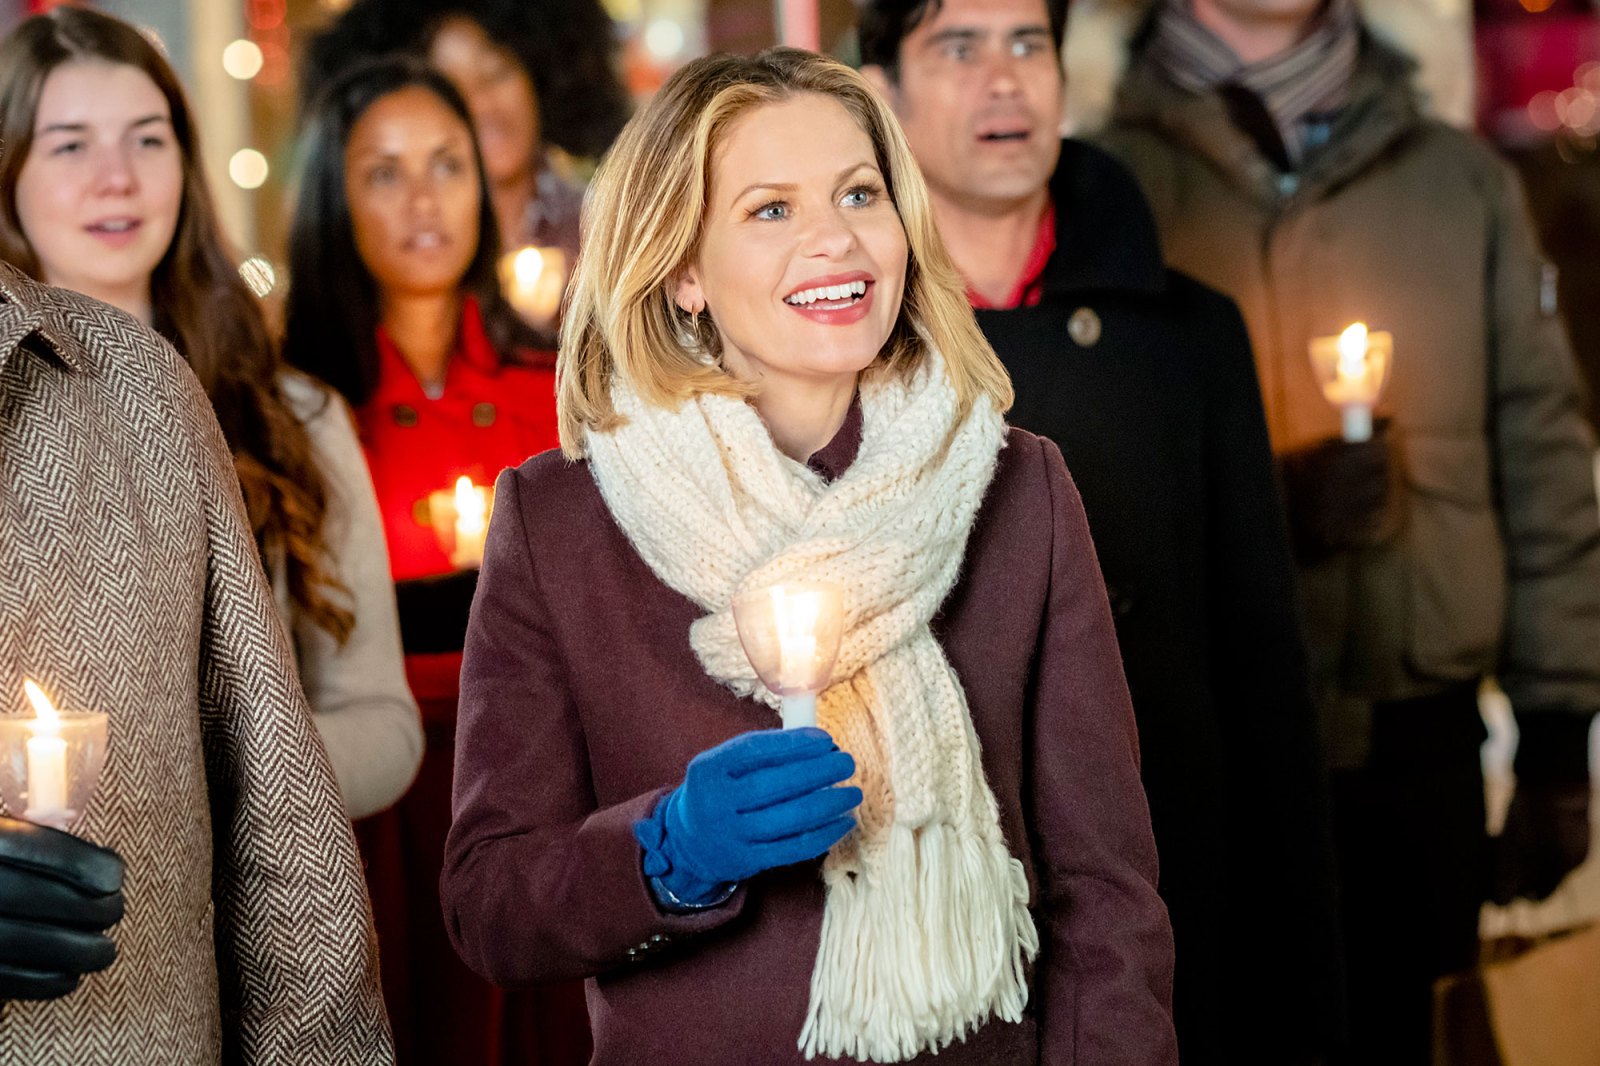 Christmas Town A Guide and Unofficial Ranking to Candace Cameron Bure Hallmark Christmas Movies